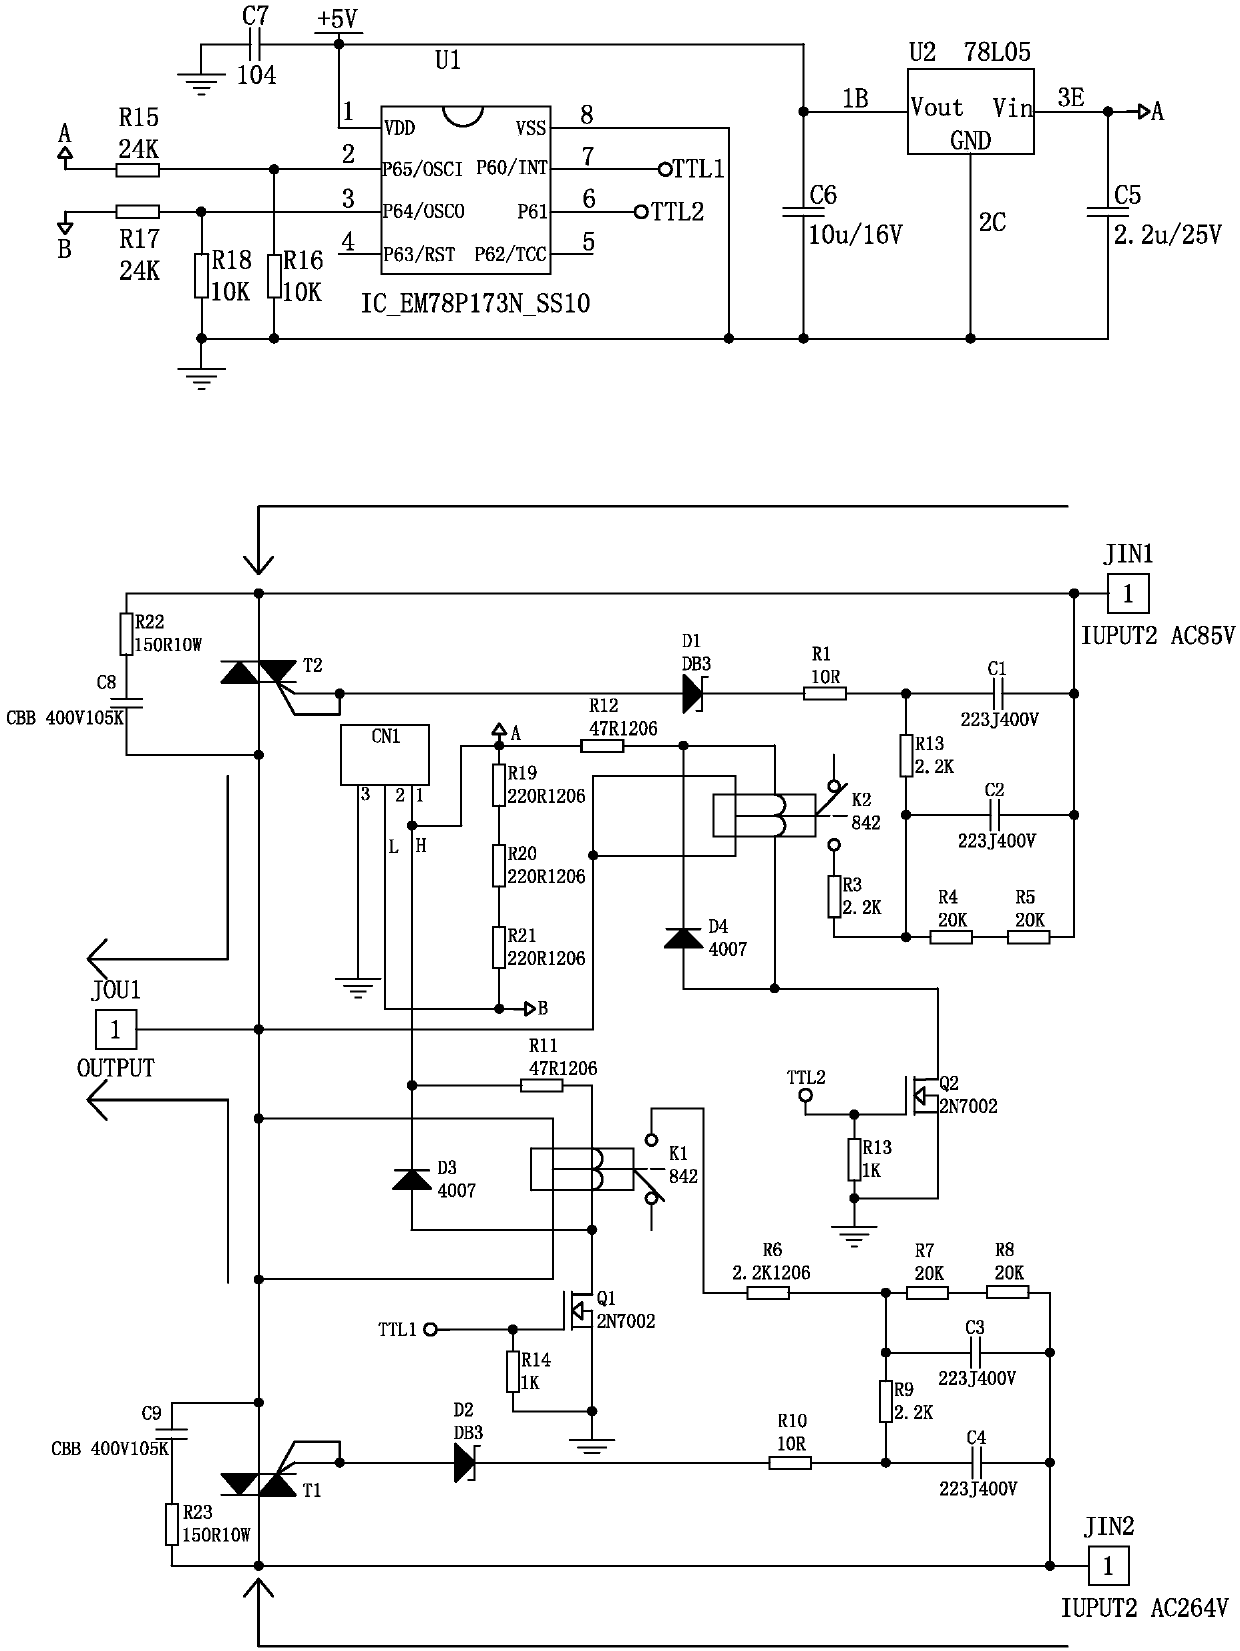 A control circuit for SCR multi-standby voltage switching